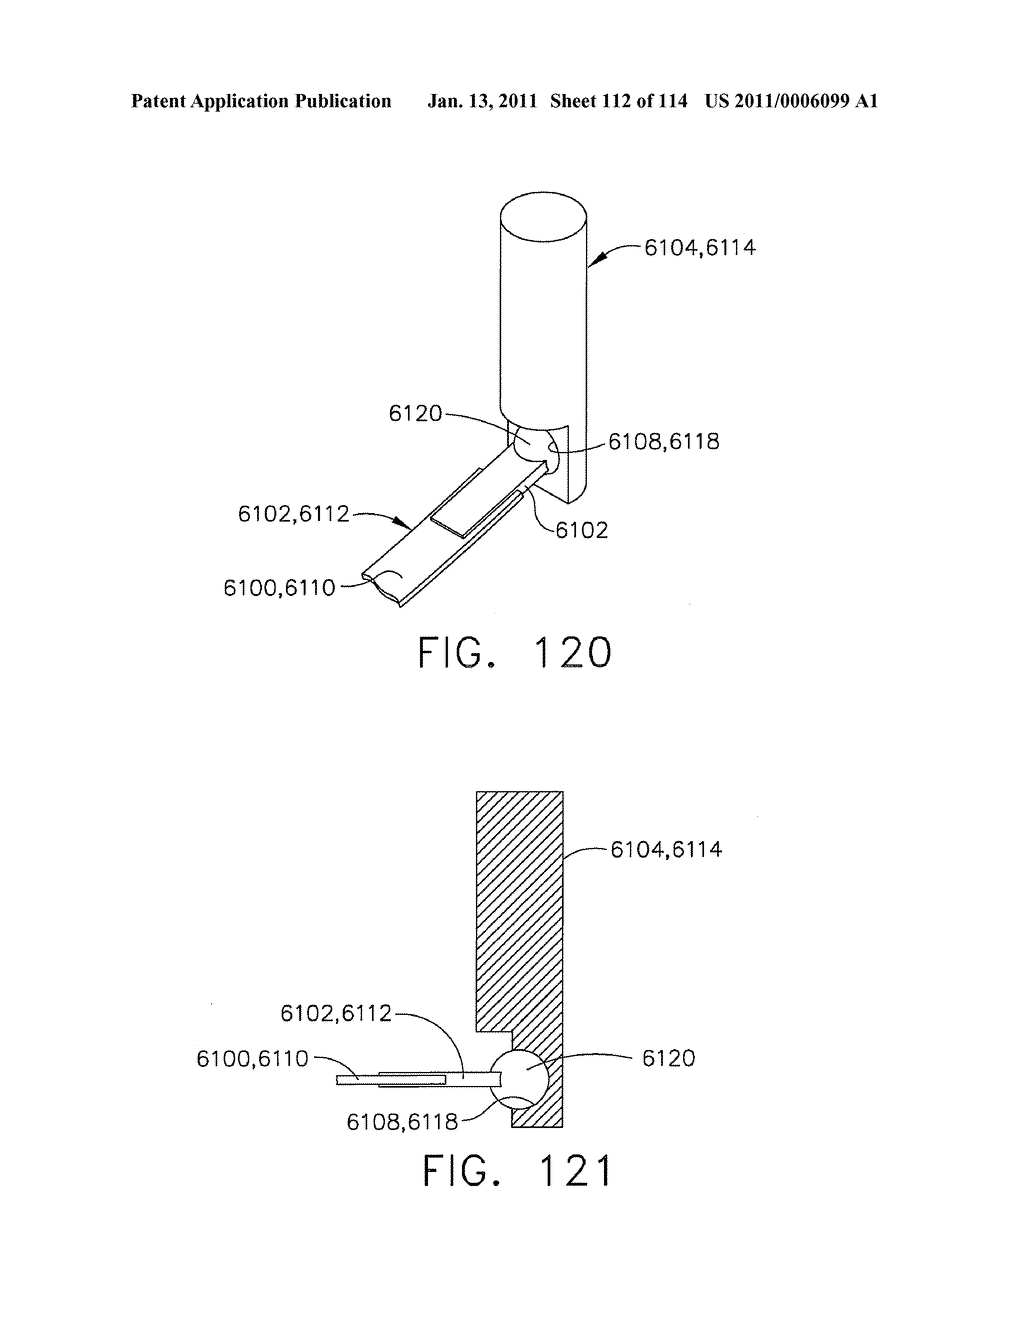 SURGICAL STAPLING APPARATUS WITH CONTROL FEATURES OPERABLE WITH ONE HAND - diagram, schematic, and image 113